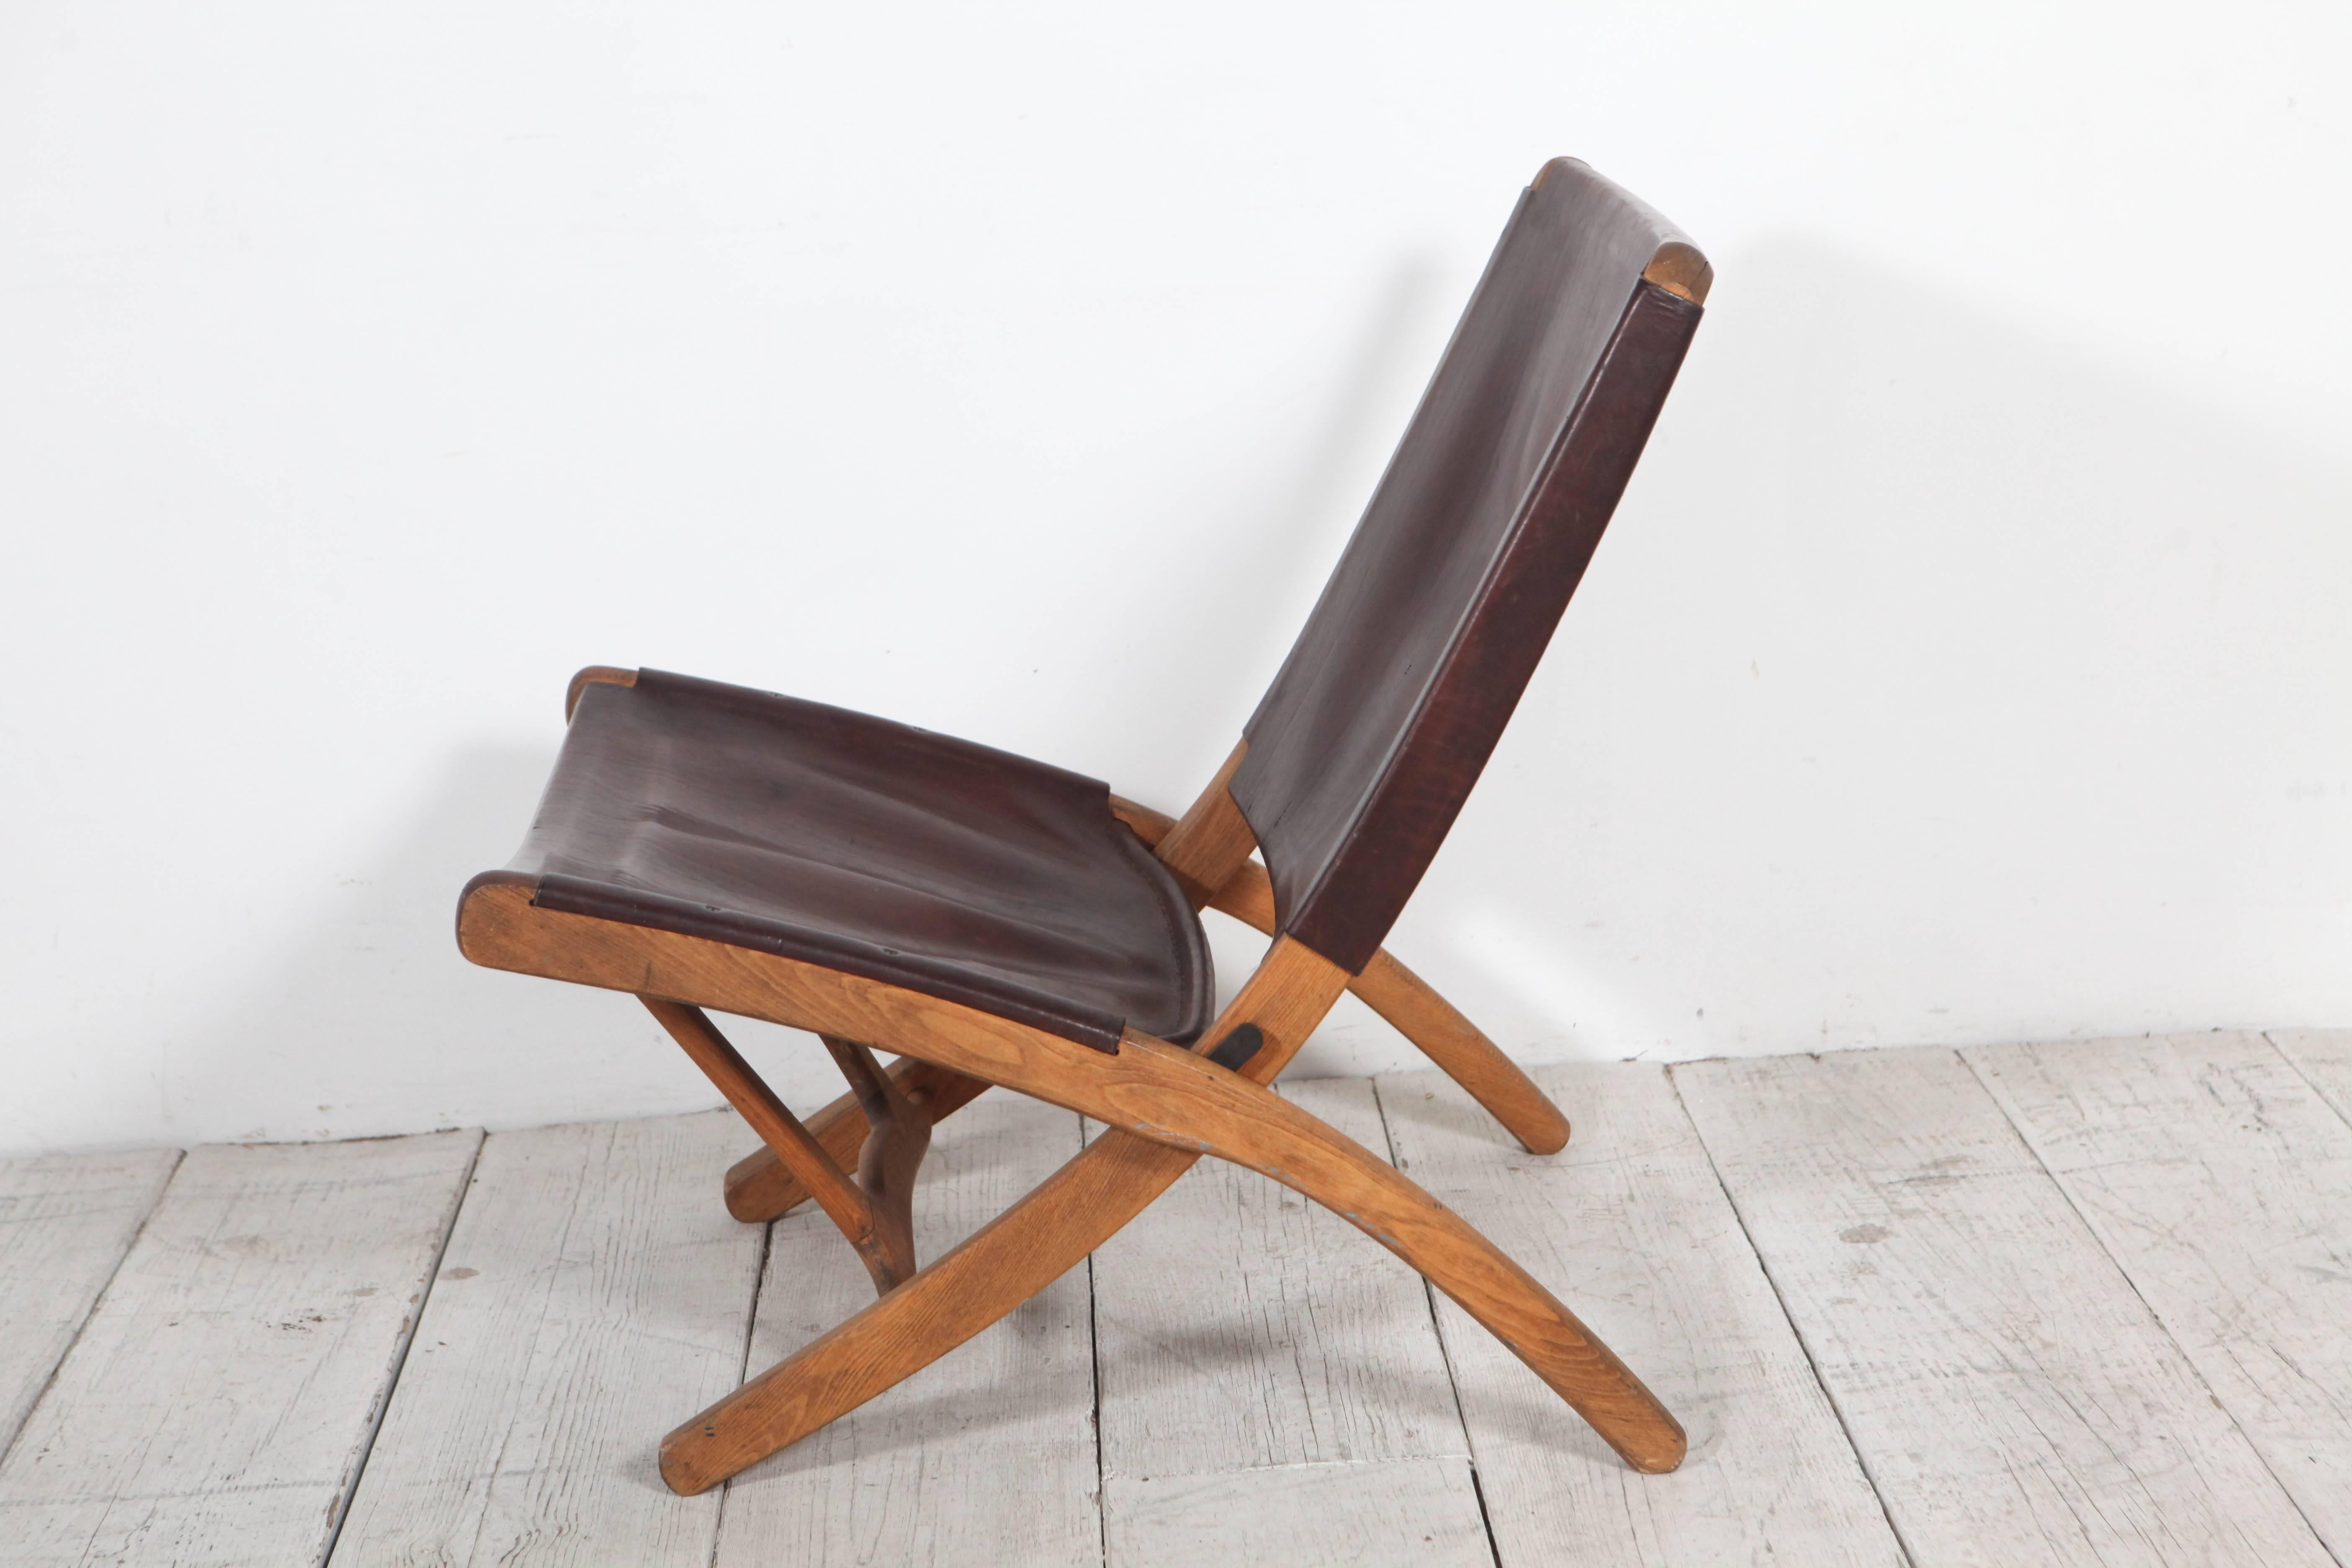 Impressive folding chair in rich leather and collapsible frame.